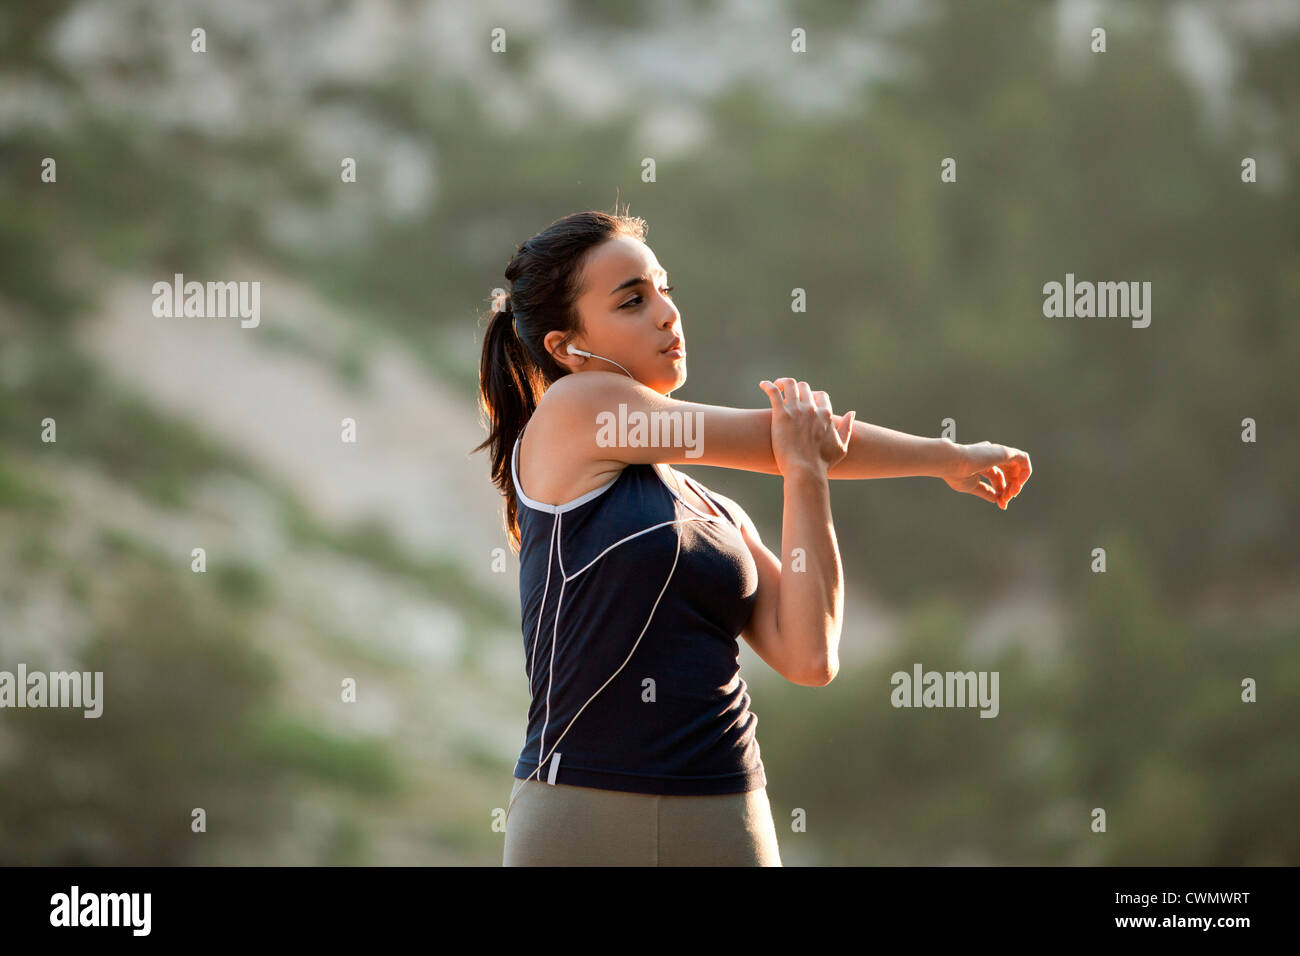 France, Marseille, young woman stretching Banque D'Images